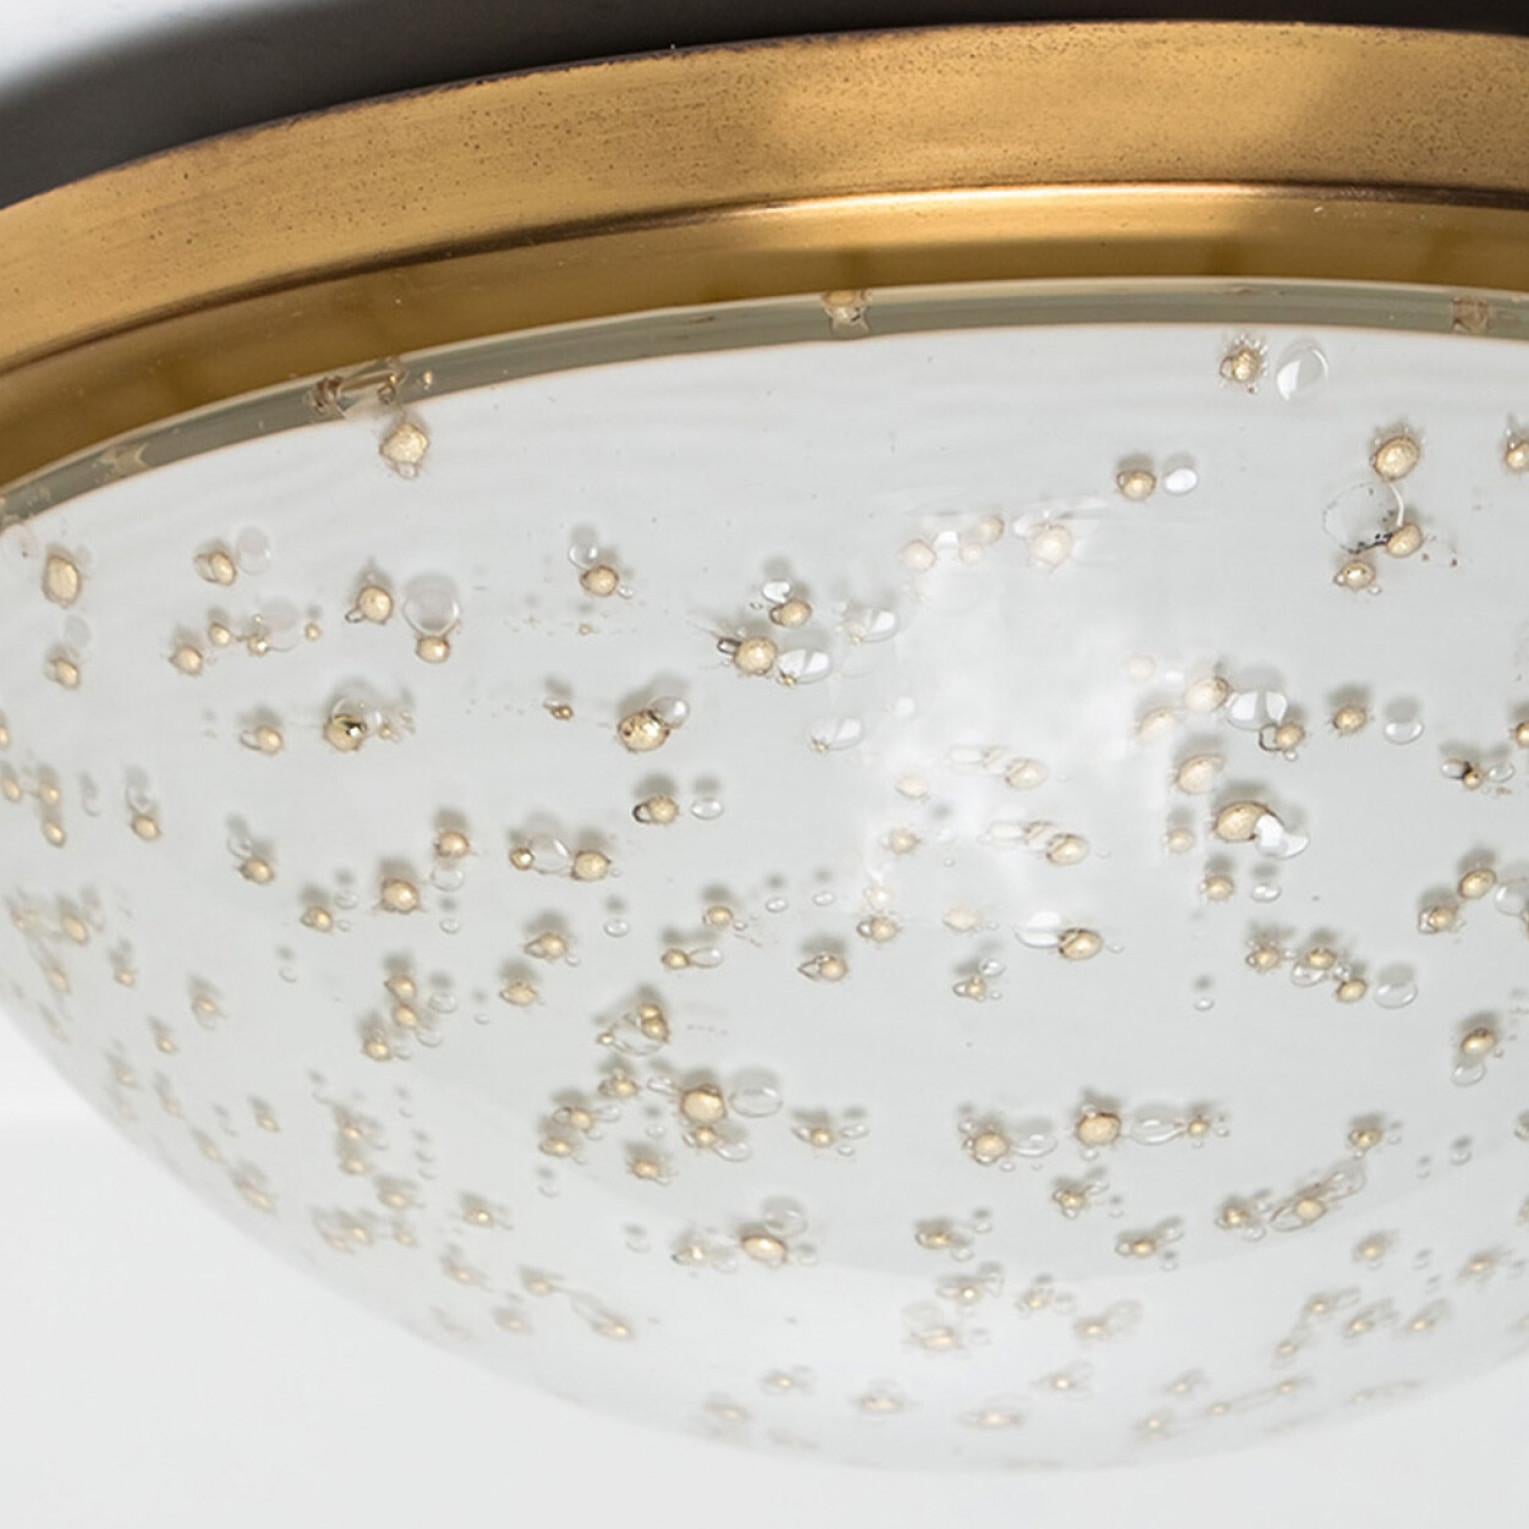 Two beautiful mid-20th century flush mounts by Peill & Putzler. Made around 1970 in Germany, Europe. Featuring a large milk glass shade with gold speckles in the middle. The light illuminates wonderful.

The lights can also be used as wall